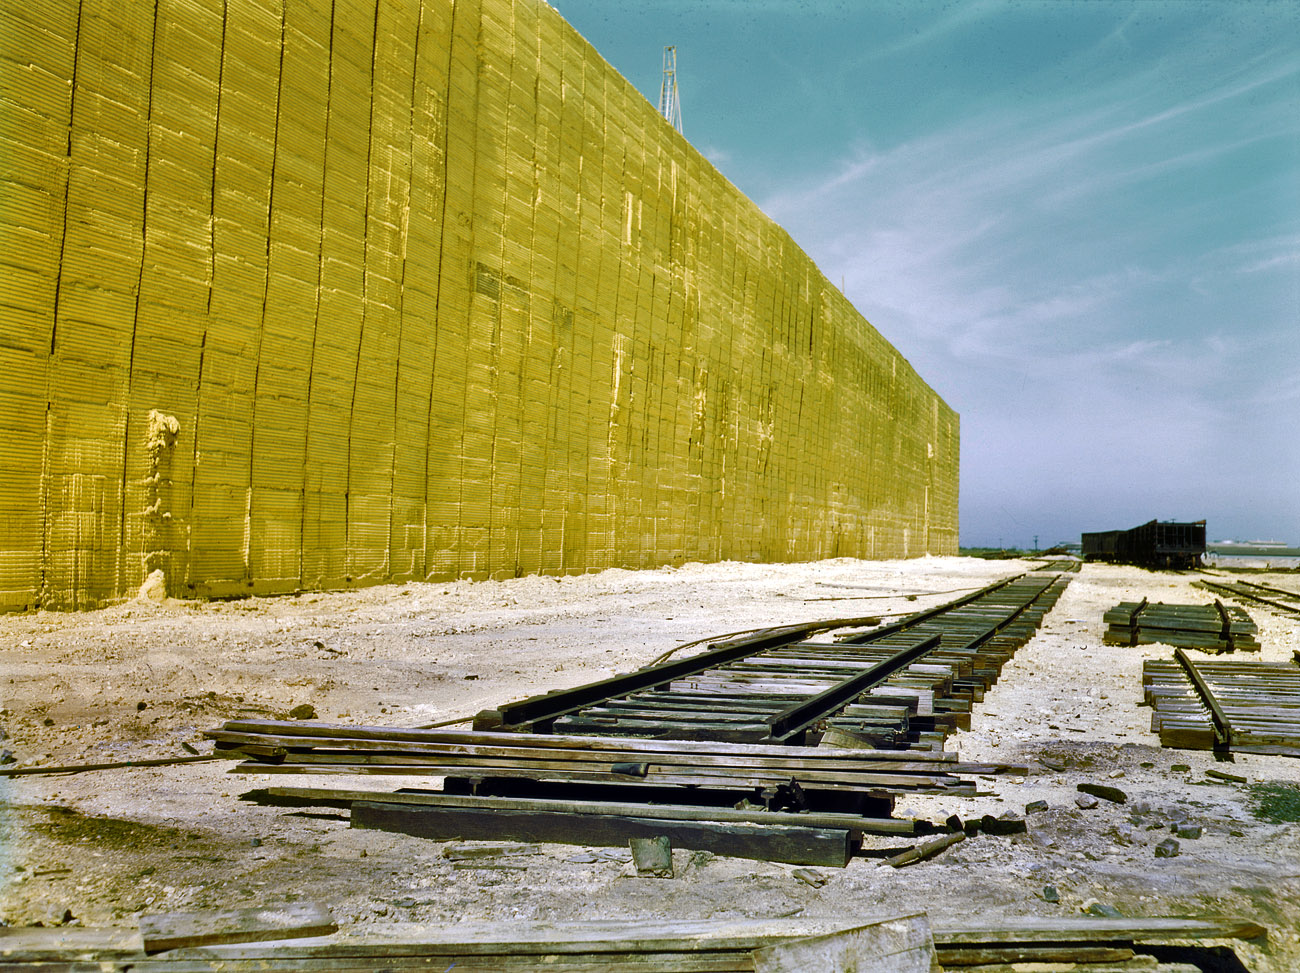 Extracted sulfur stacked in a "vat" 60 feet tall at Freeport Sulphur Co. in Hoskins Mound, Texas. View full size. 4x5 Kodachrome transparency by John Vachon.